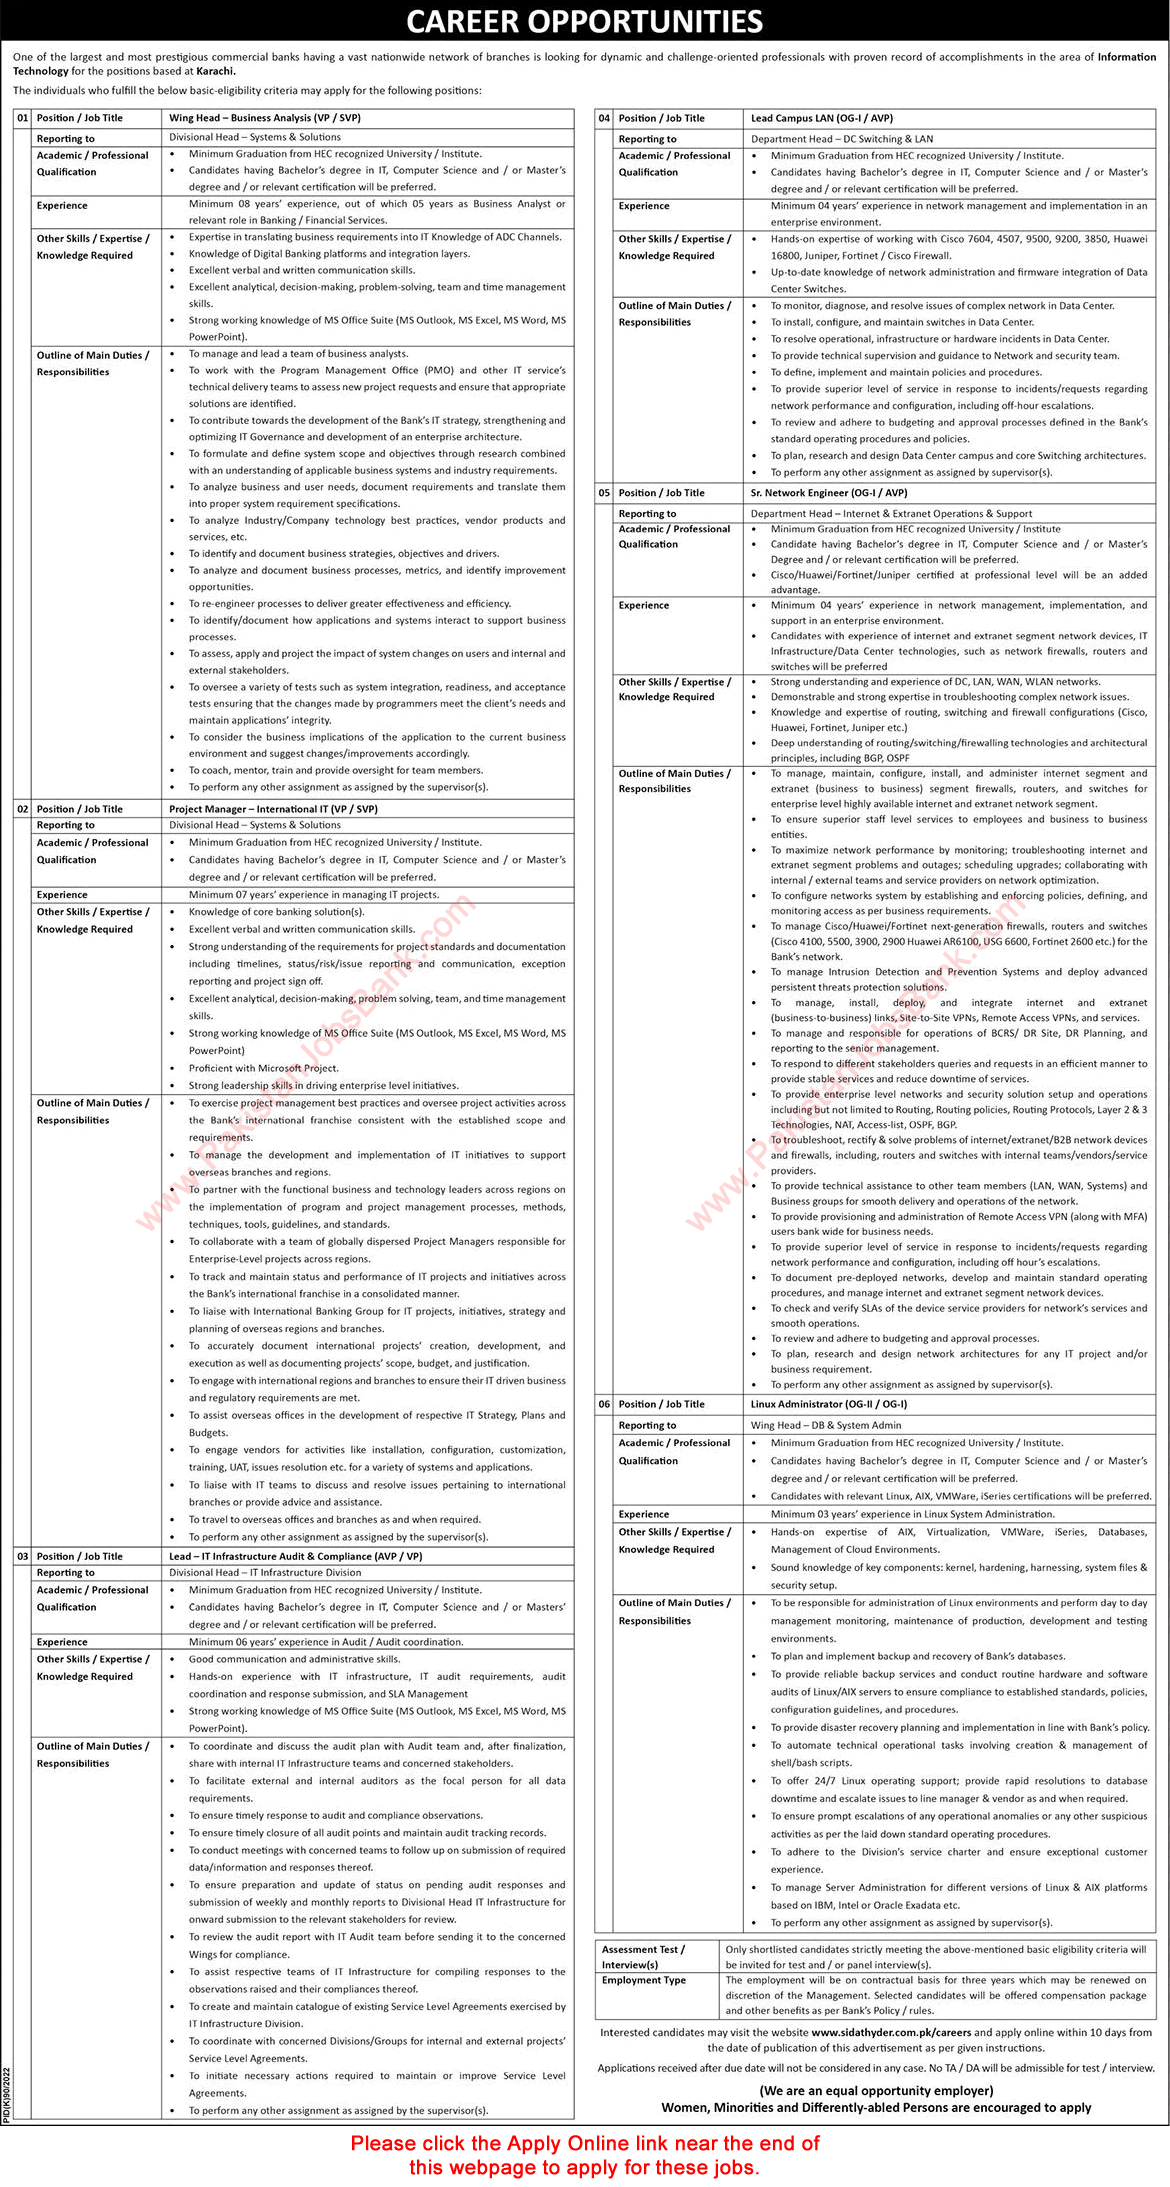 Bank Jobs in Karachi July 2022 Apply Online Network Engineer & Others Latest